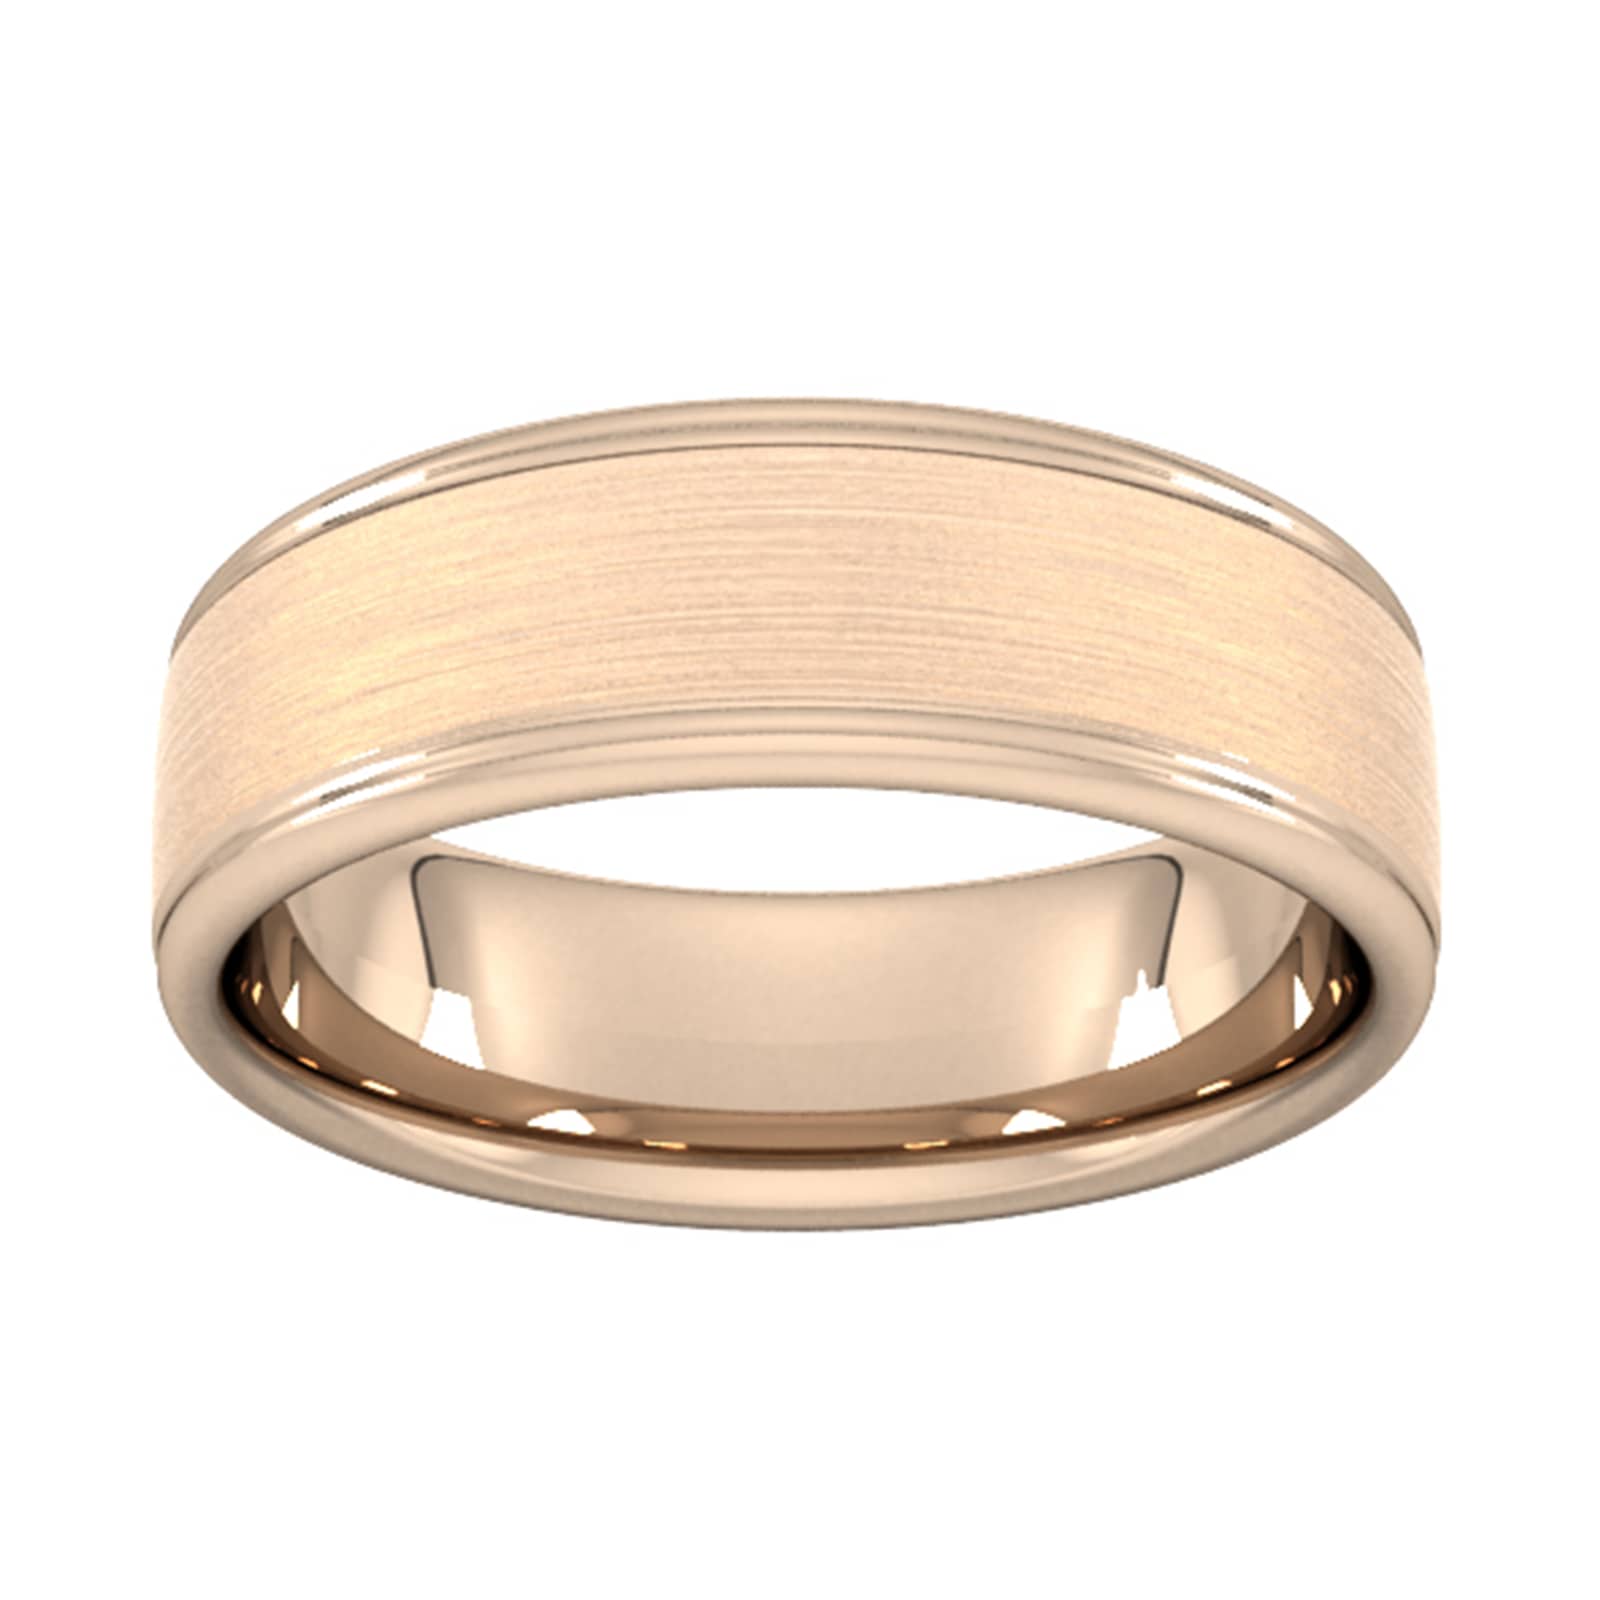 7mm D Shape Heavy Matt Centre With Grooves Wedding Ring In 9 Carat Rose Gold - Ring Size G